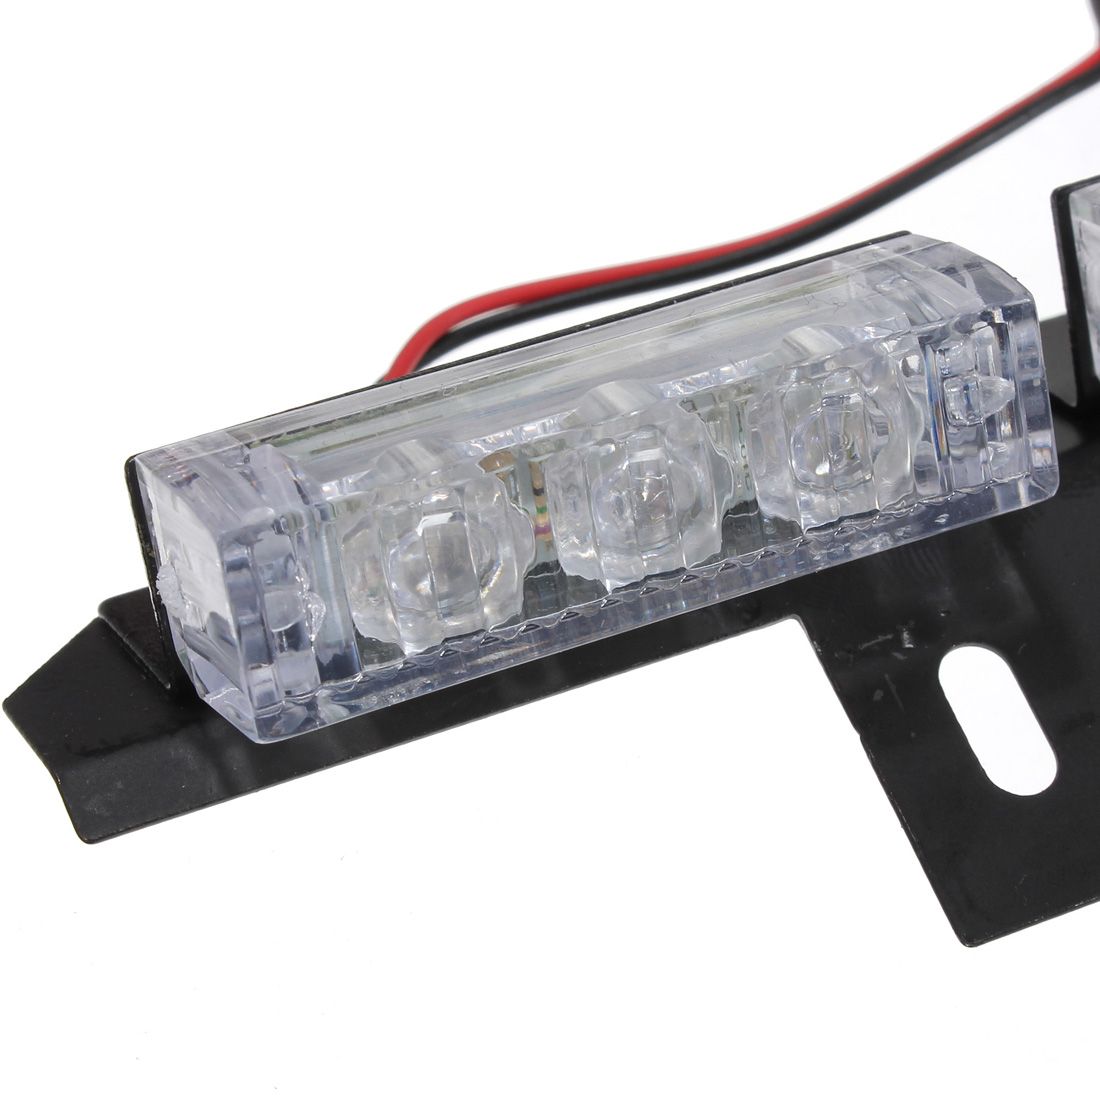 54-LED-Emergency-Strobe-Lights-Front-Grill-Flash-Lamps-with-3-Flashing-Mode-Yellow-for-12V-Vehicles-55171